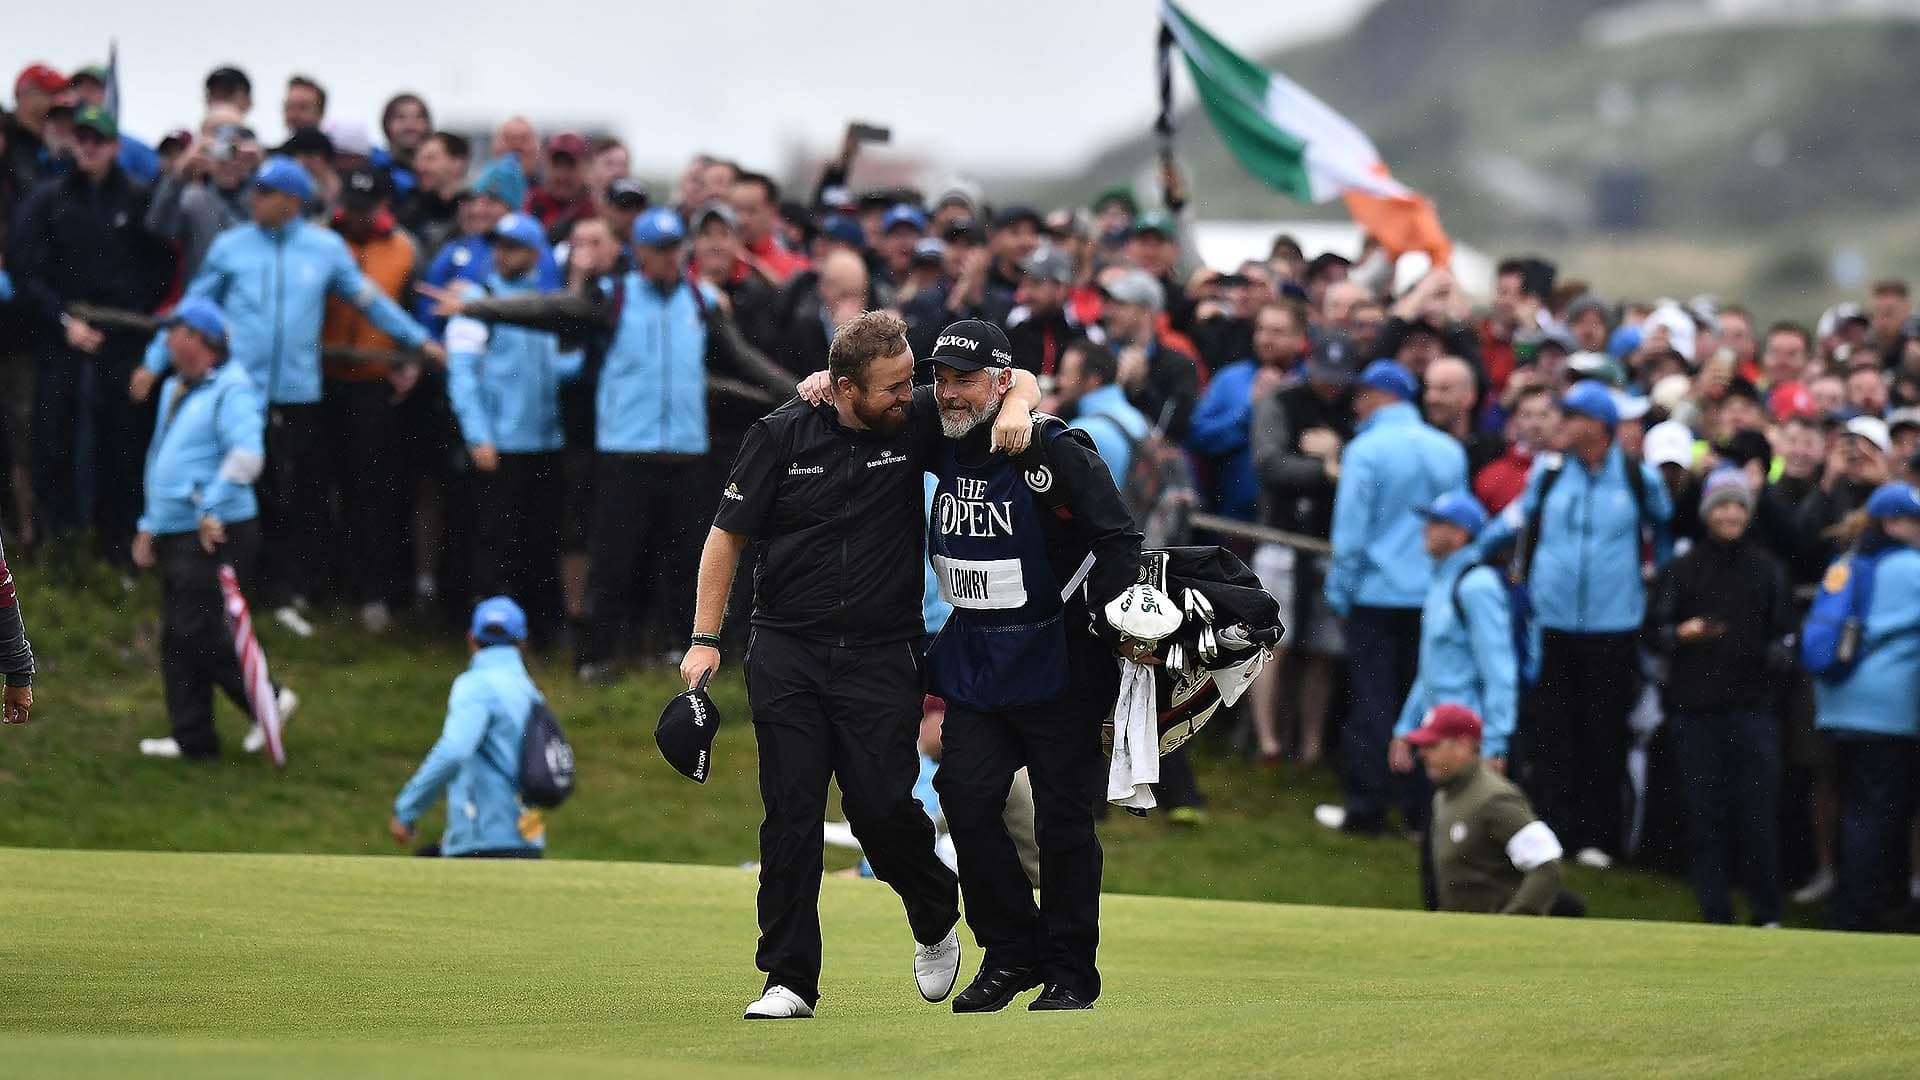 British Open More Than An Fractured Northern Ireland